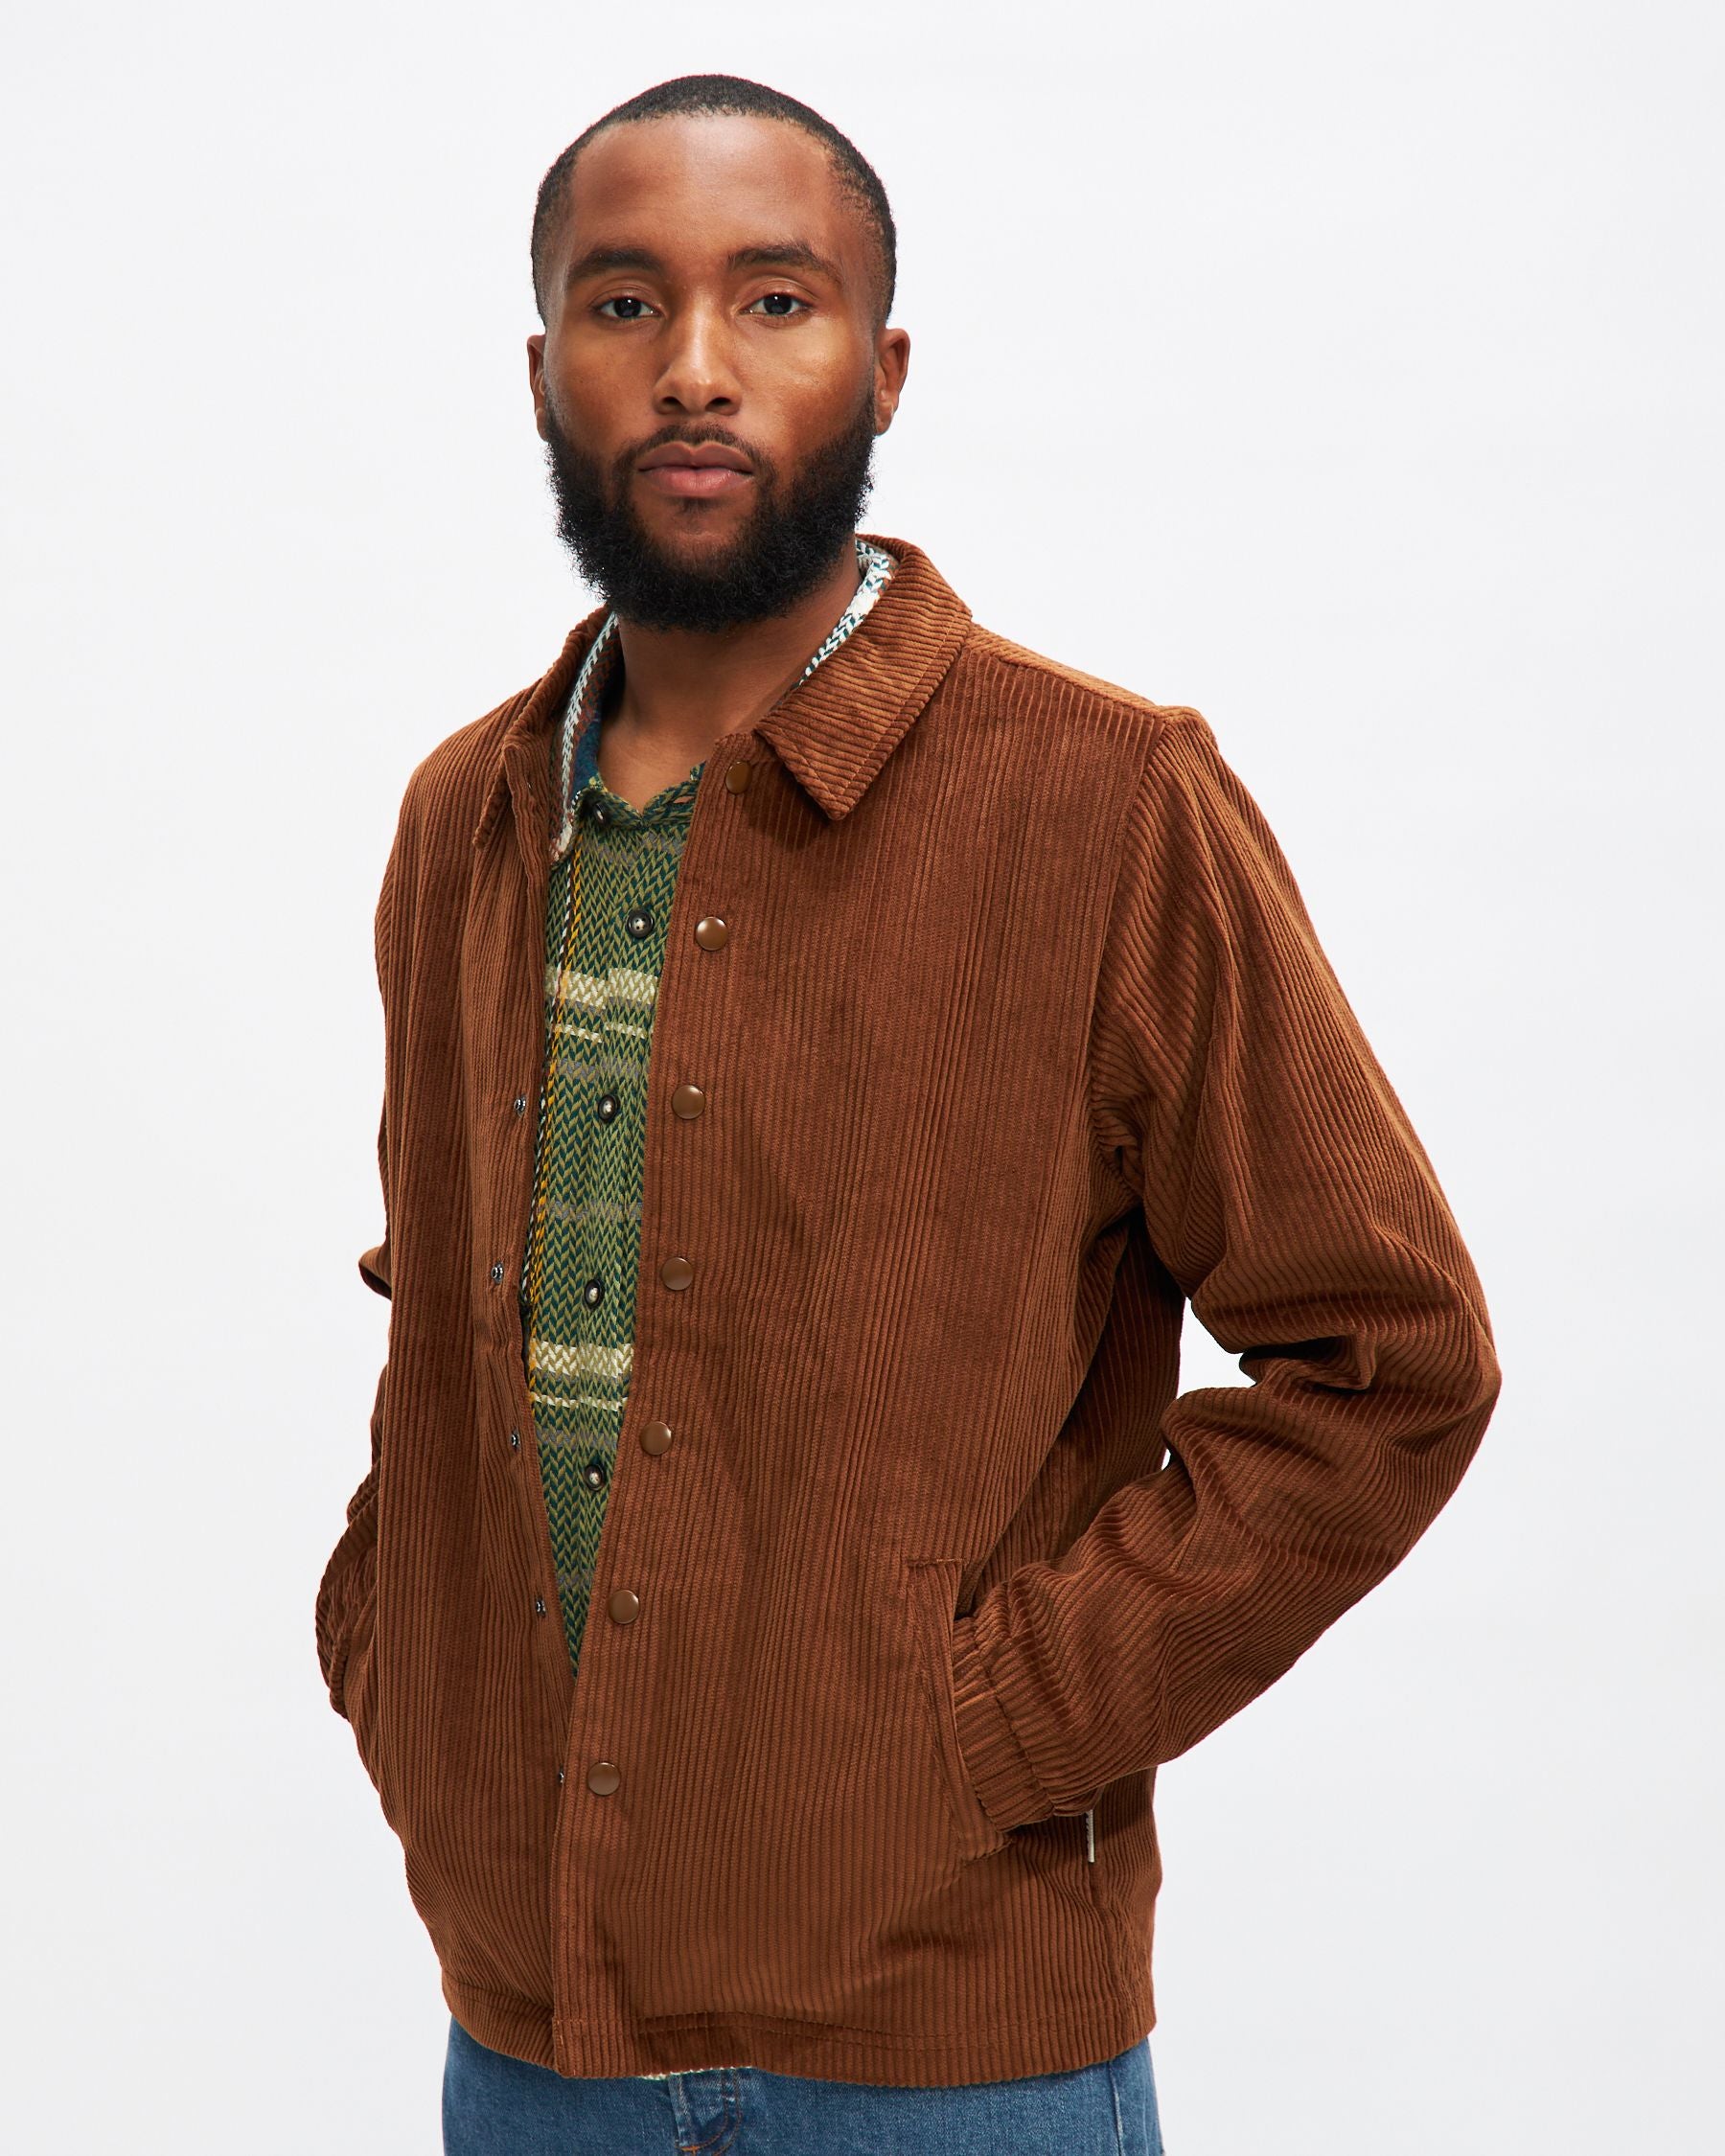 Corduroy Manager's Jacket in Dune